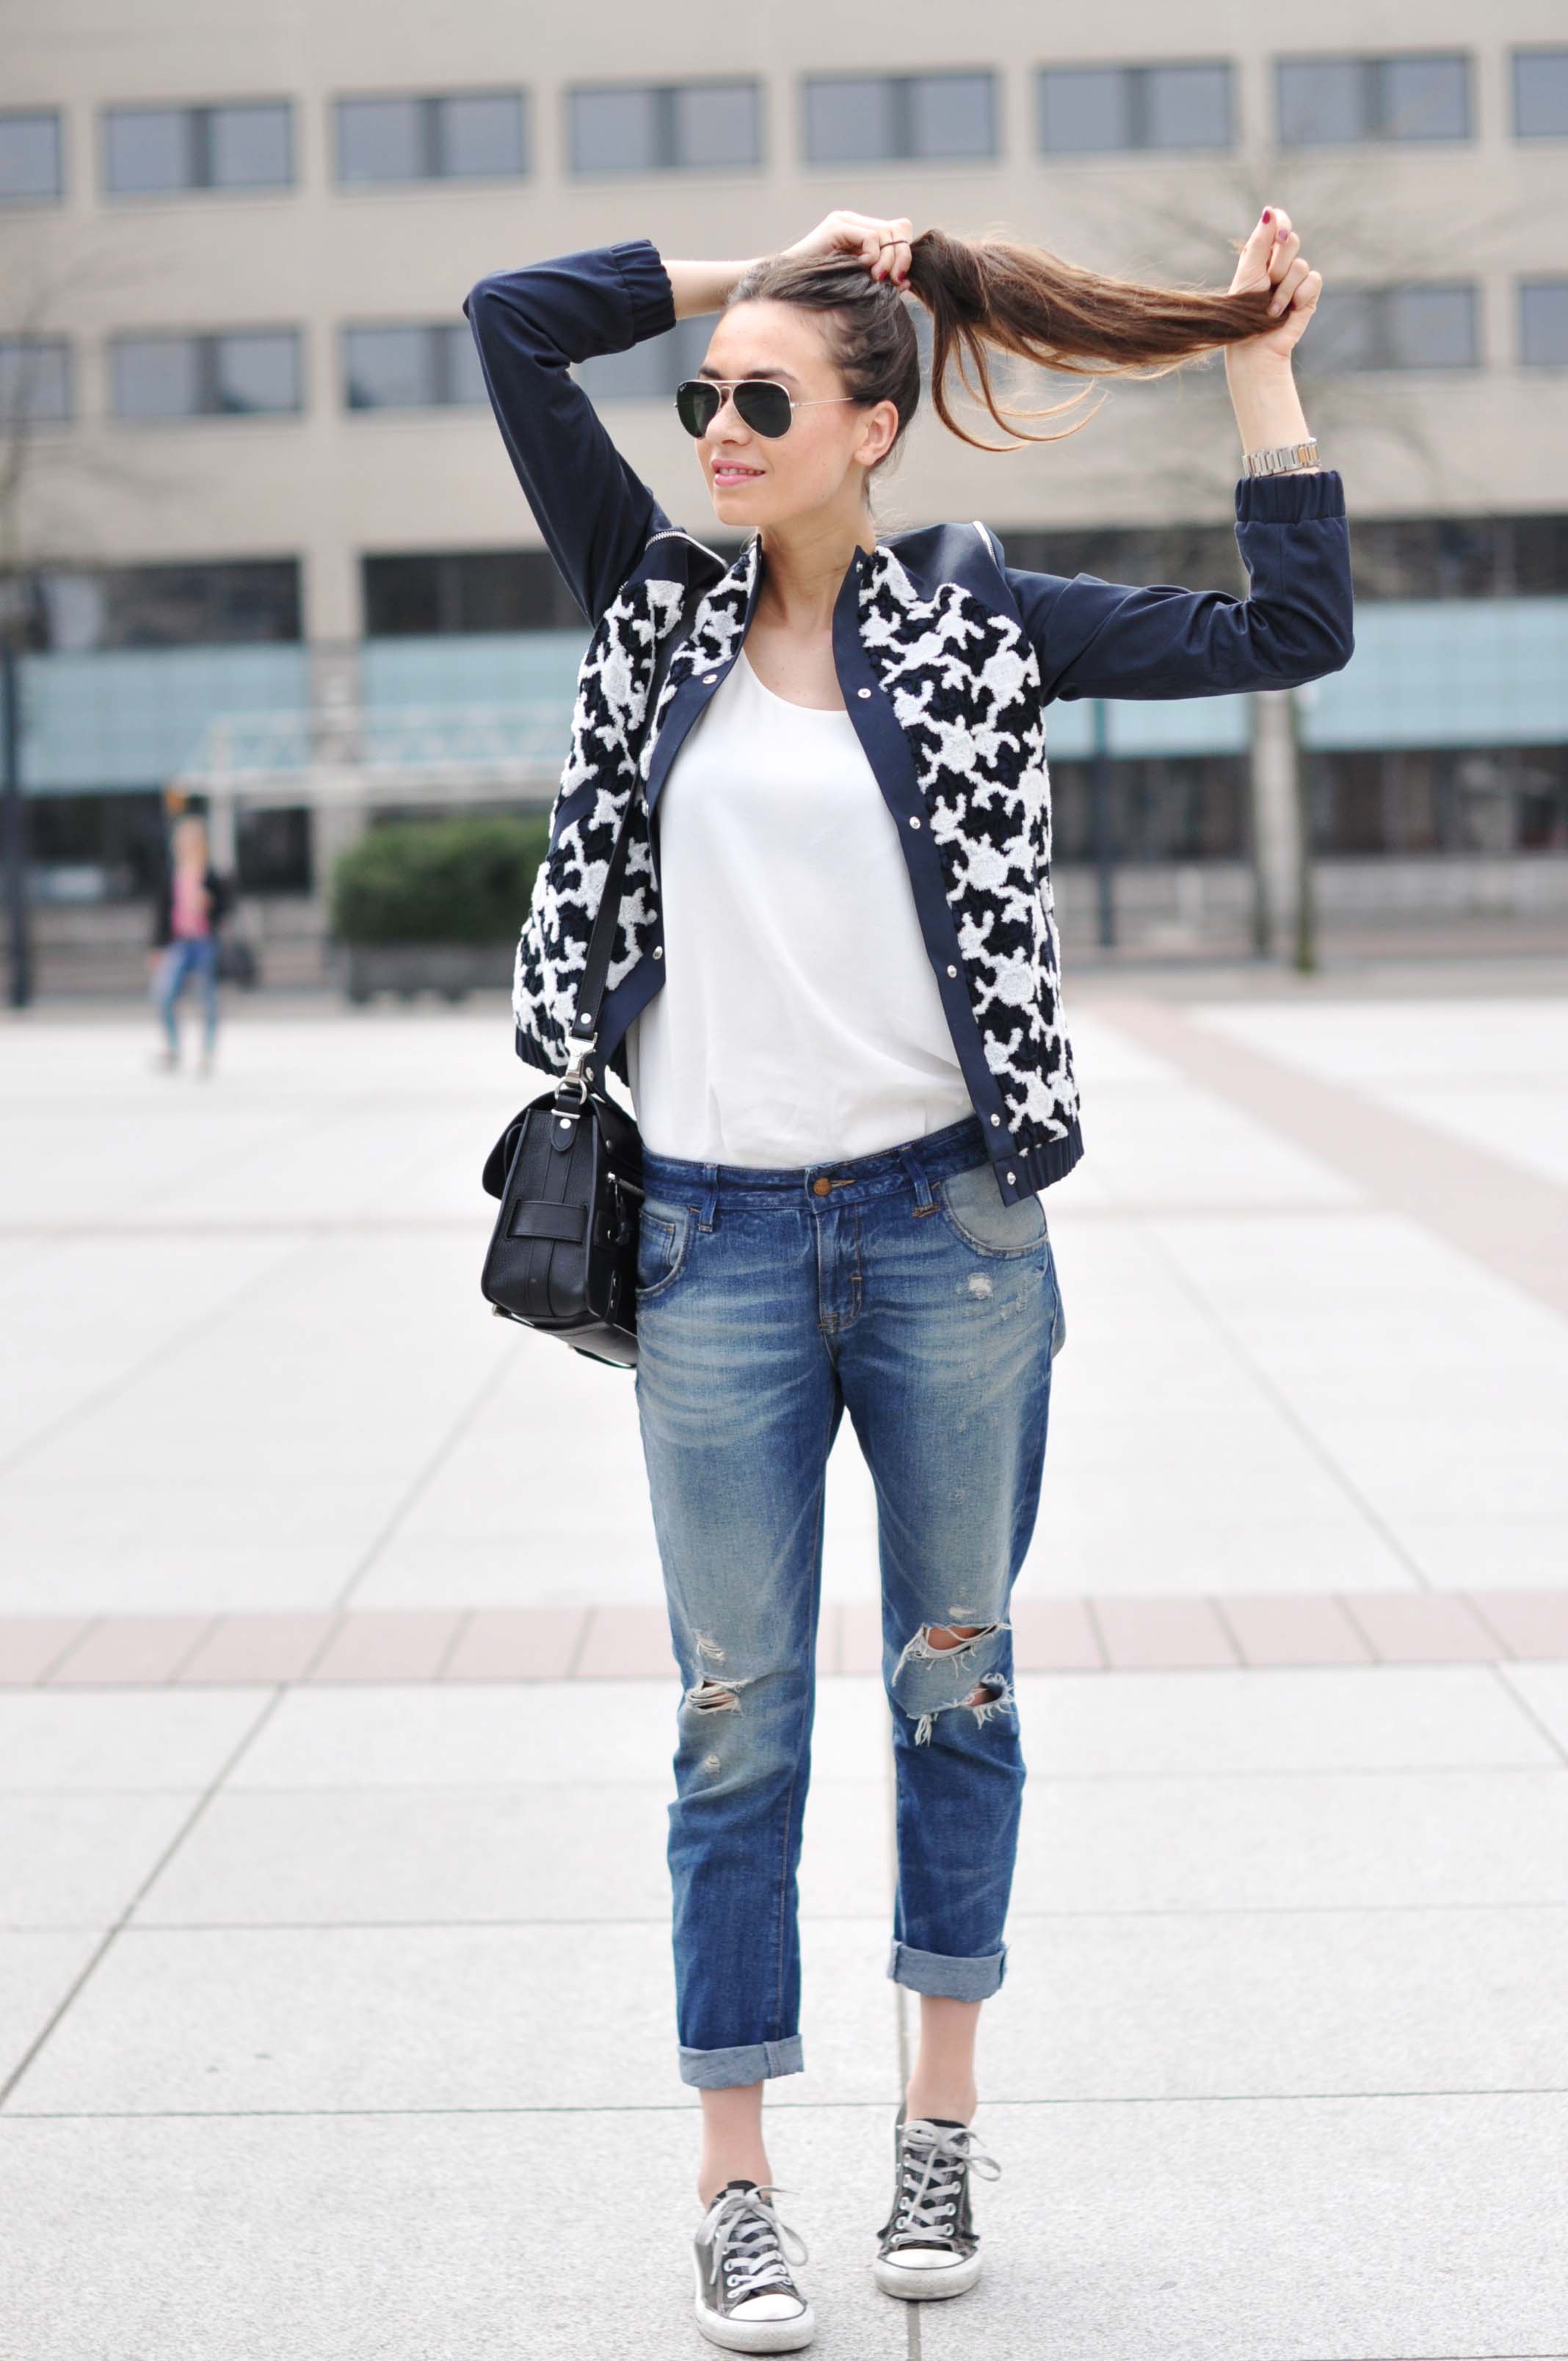 30 Stylish Outfits To Wear With Sneakers